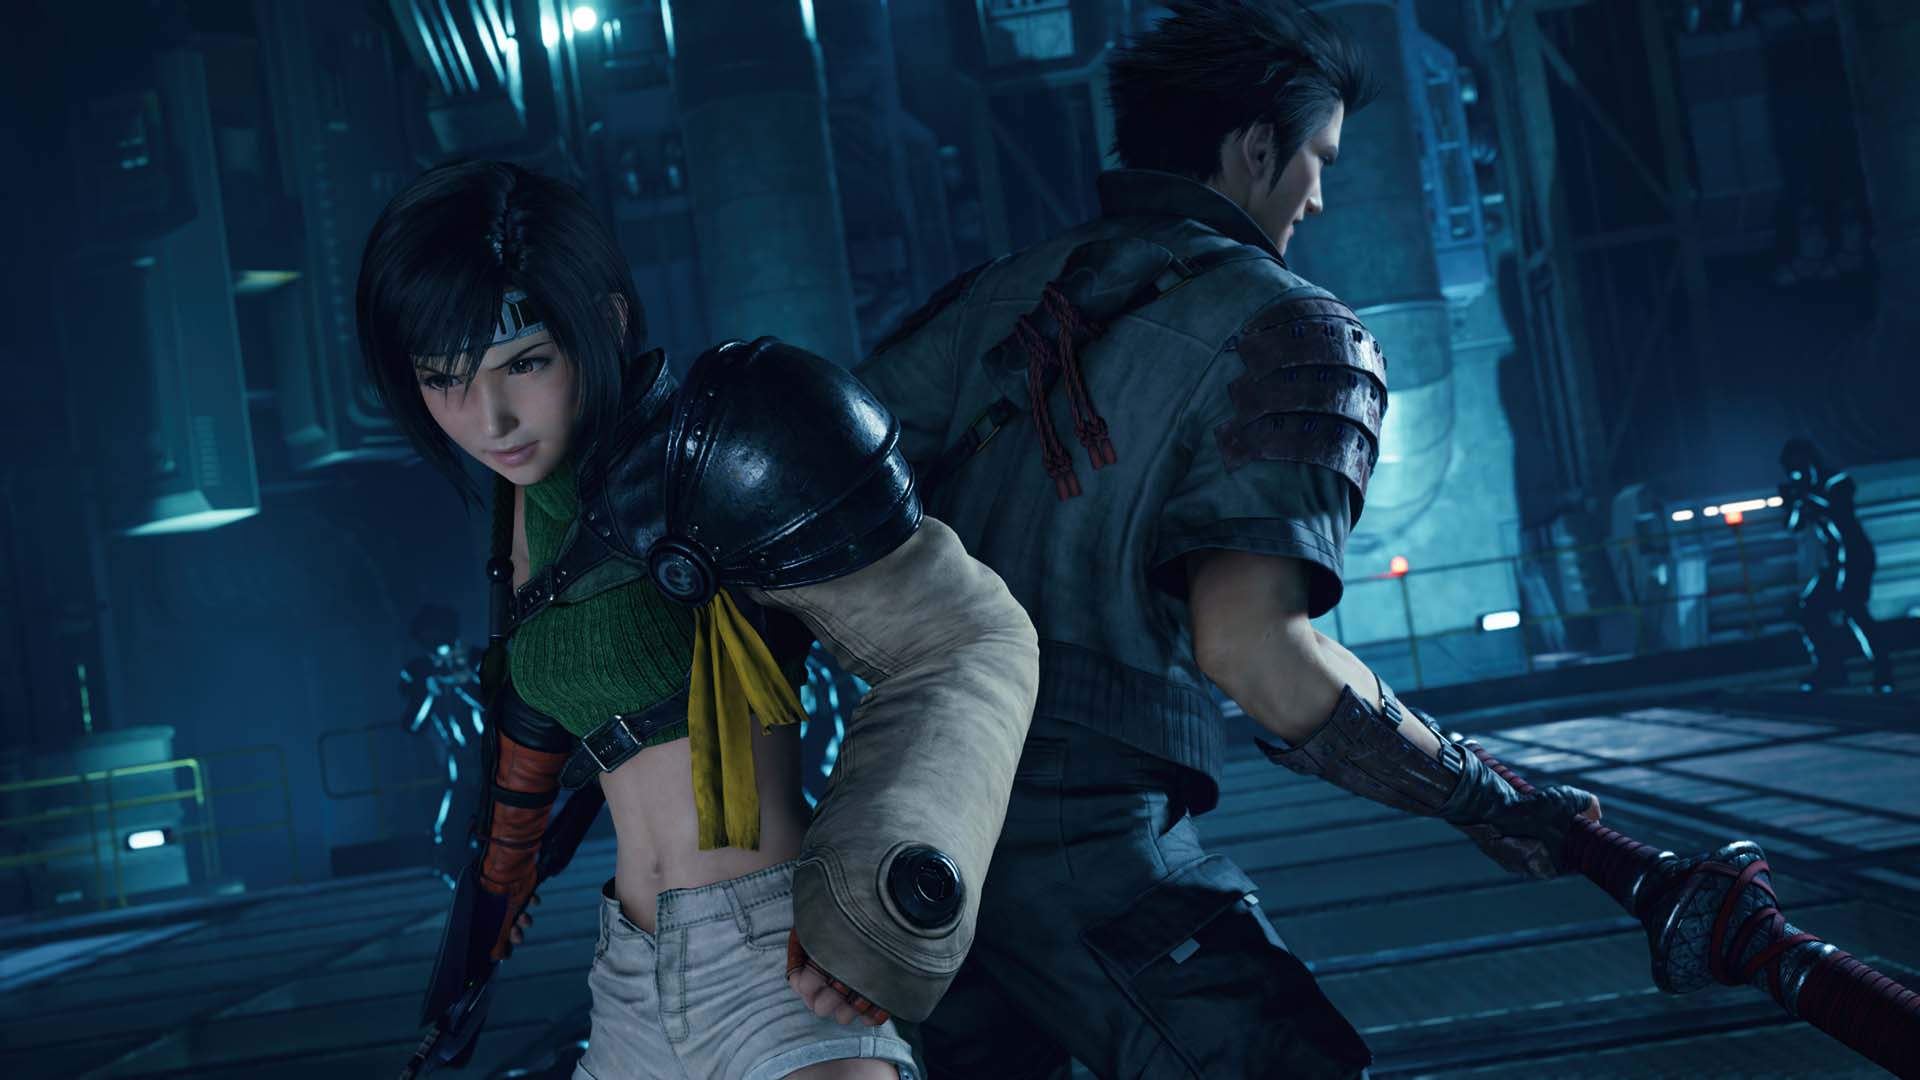 Final Fantasy VII Remake - EPISODE INTERmission (New Story Content Featuring Yuffie) DLC EU PS5 CD Key [$ 11.29]